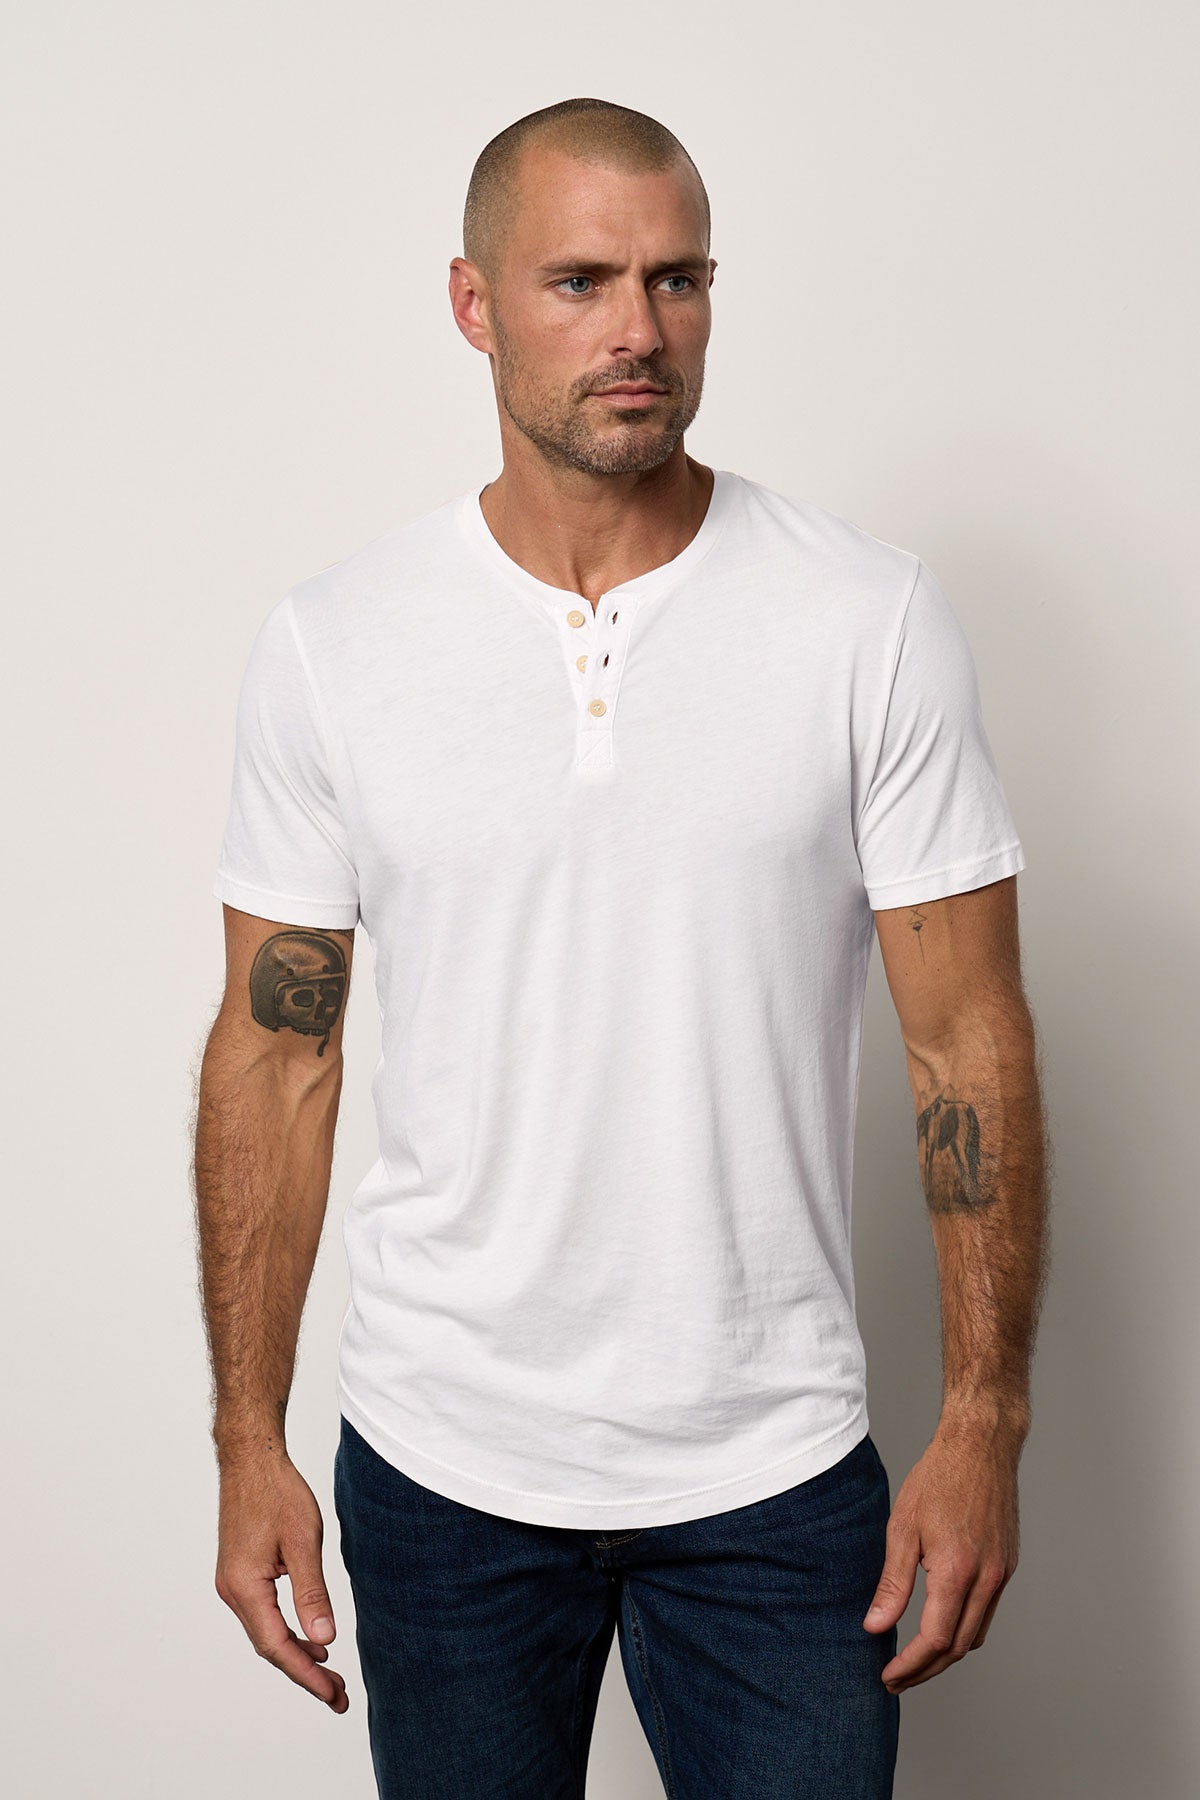 A man with a shaved head and tattoos on his arms, wearing a white Velvet by Graham & Spencer FULTON HENLEY tee, stands facing the camera with a neutral expression.-36640141115585